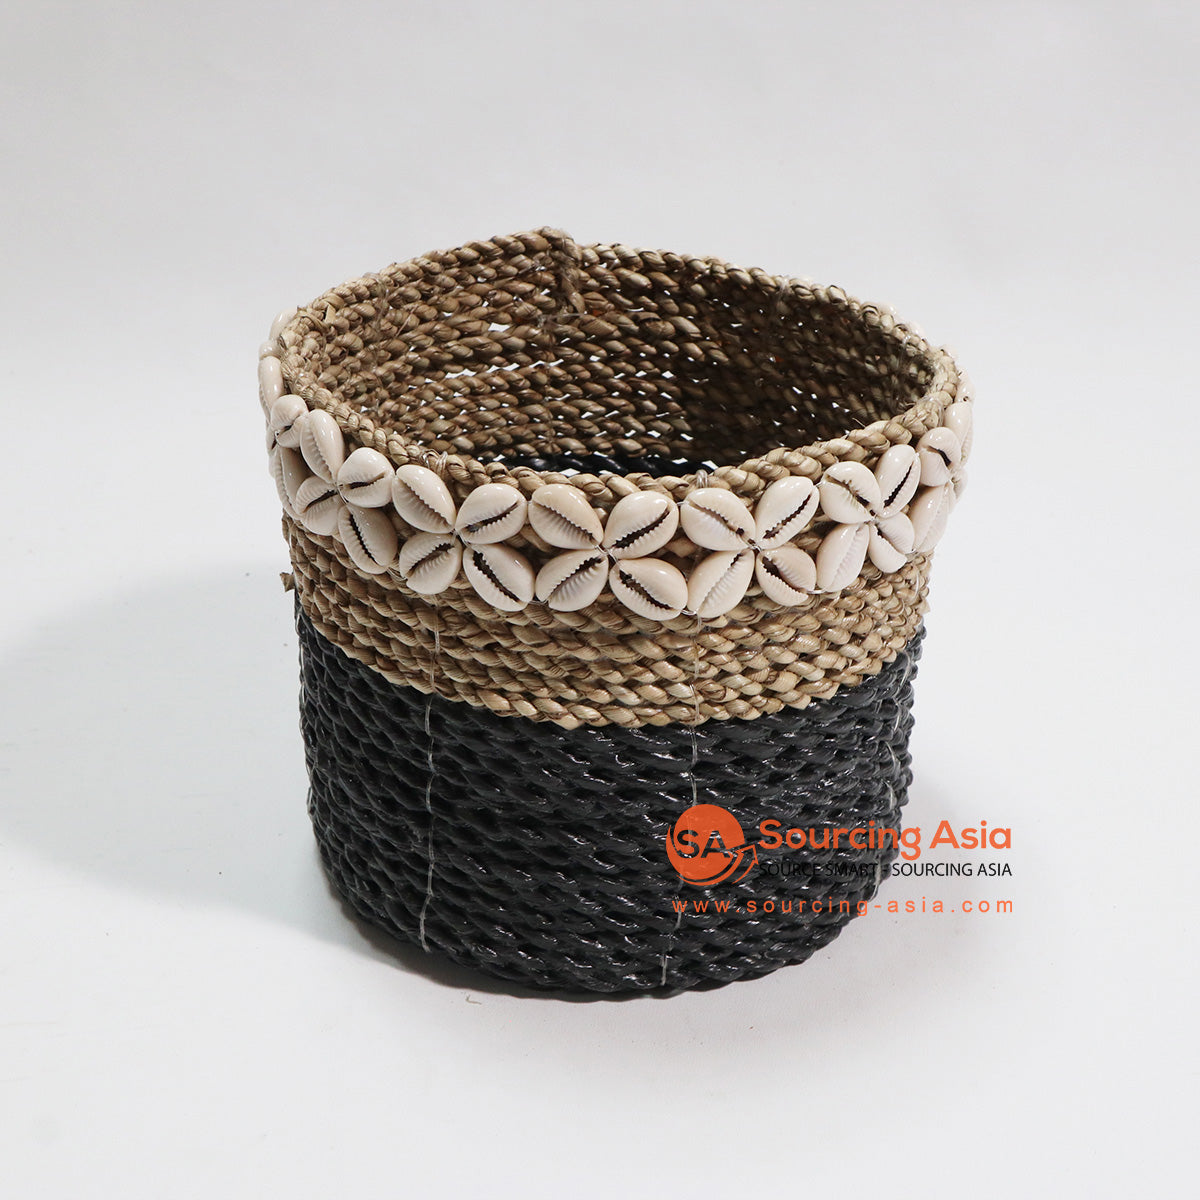 HBSC039 NATURAL AND BLACK SEA GRASS MINI PLANT BASKET WITH SHELL DECORATION